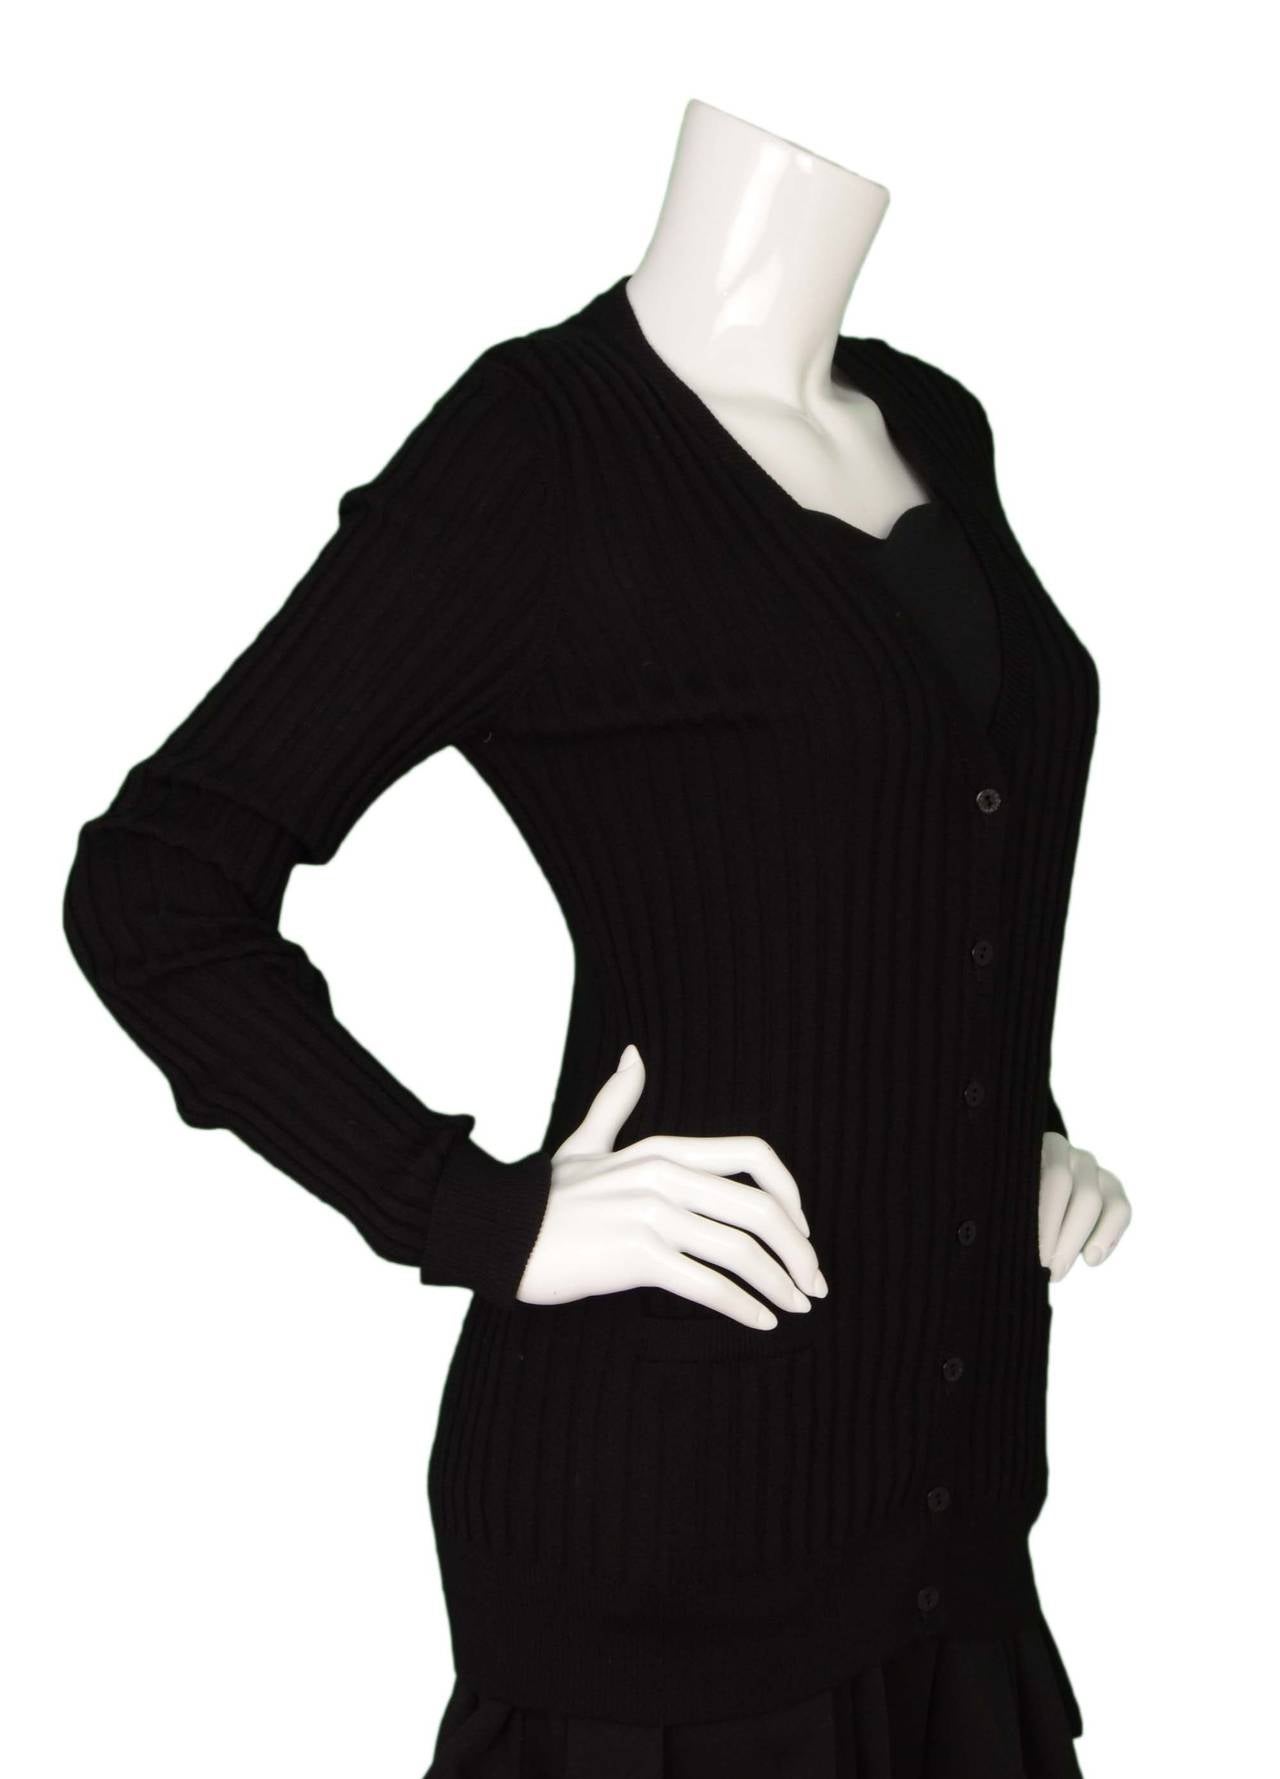 Dolce & Gabbana Black Ribbed Cashmere Cardigan
Features small tag on hip with nylon fabric over it reading 